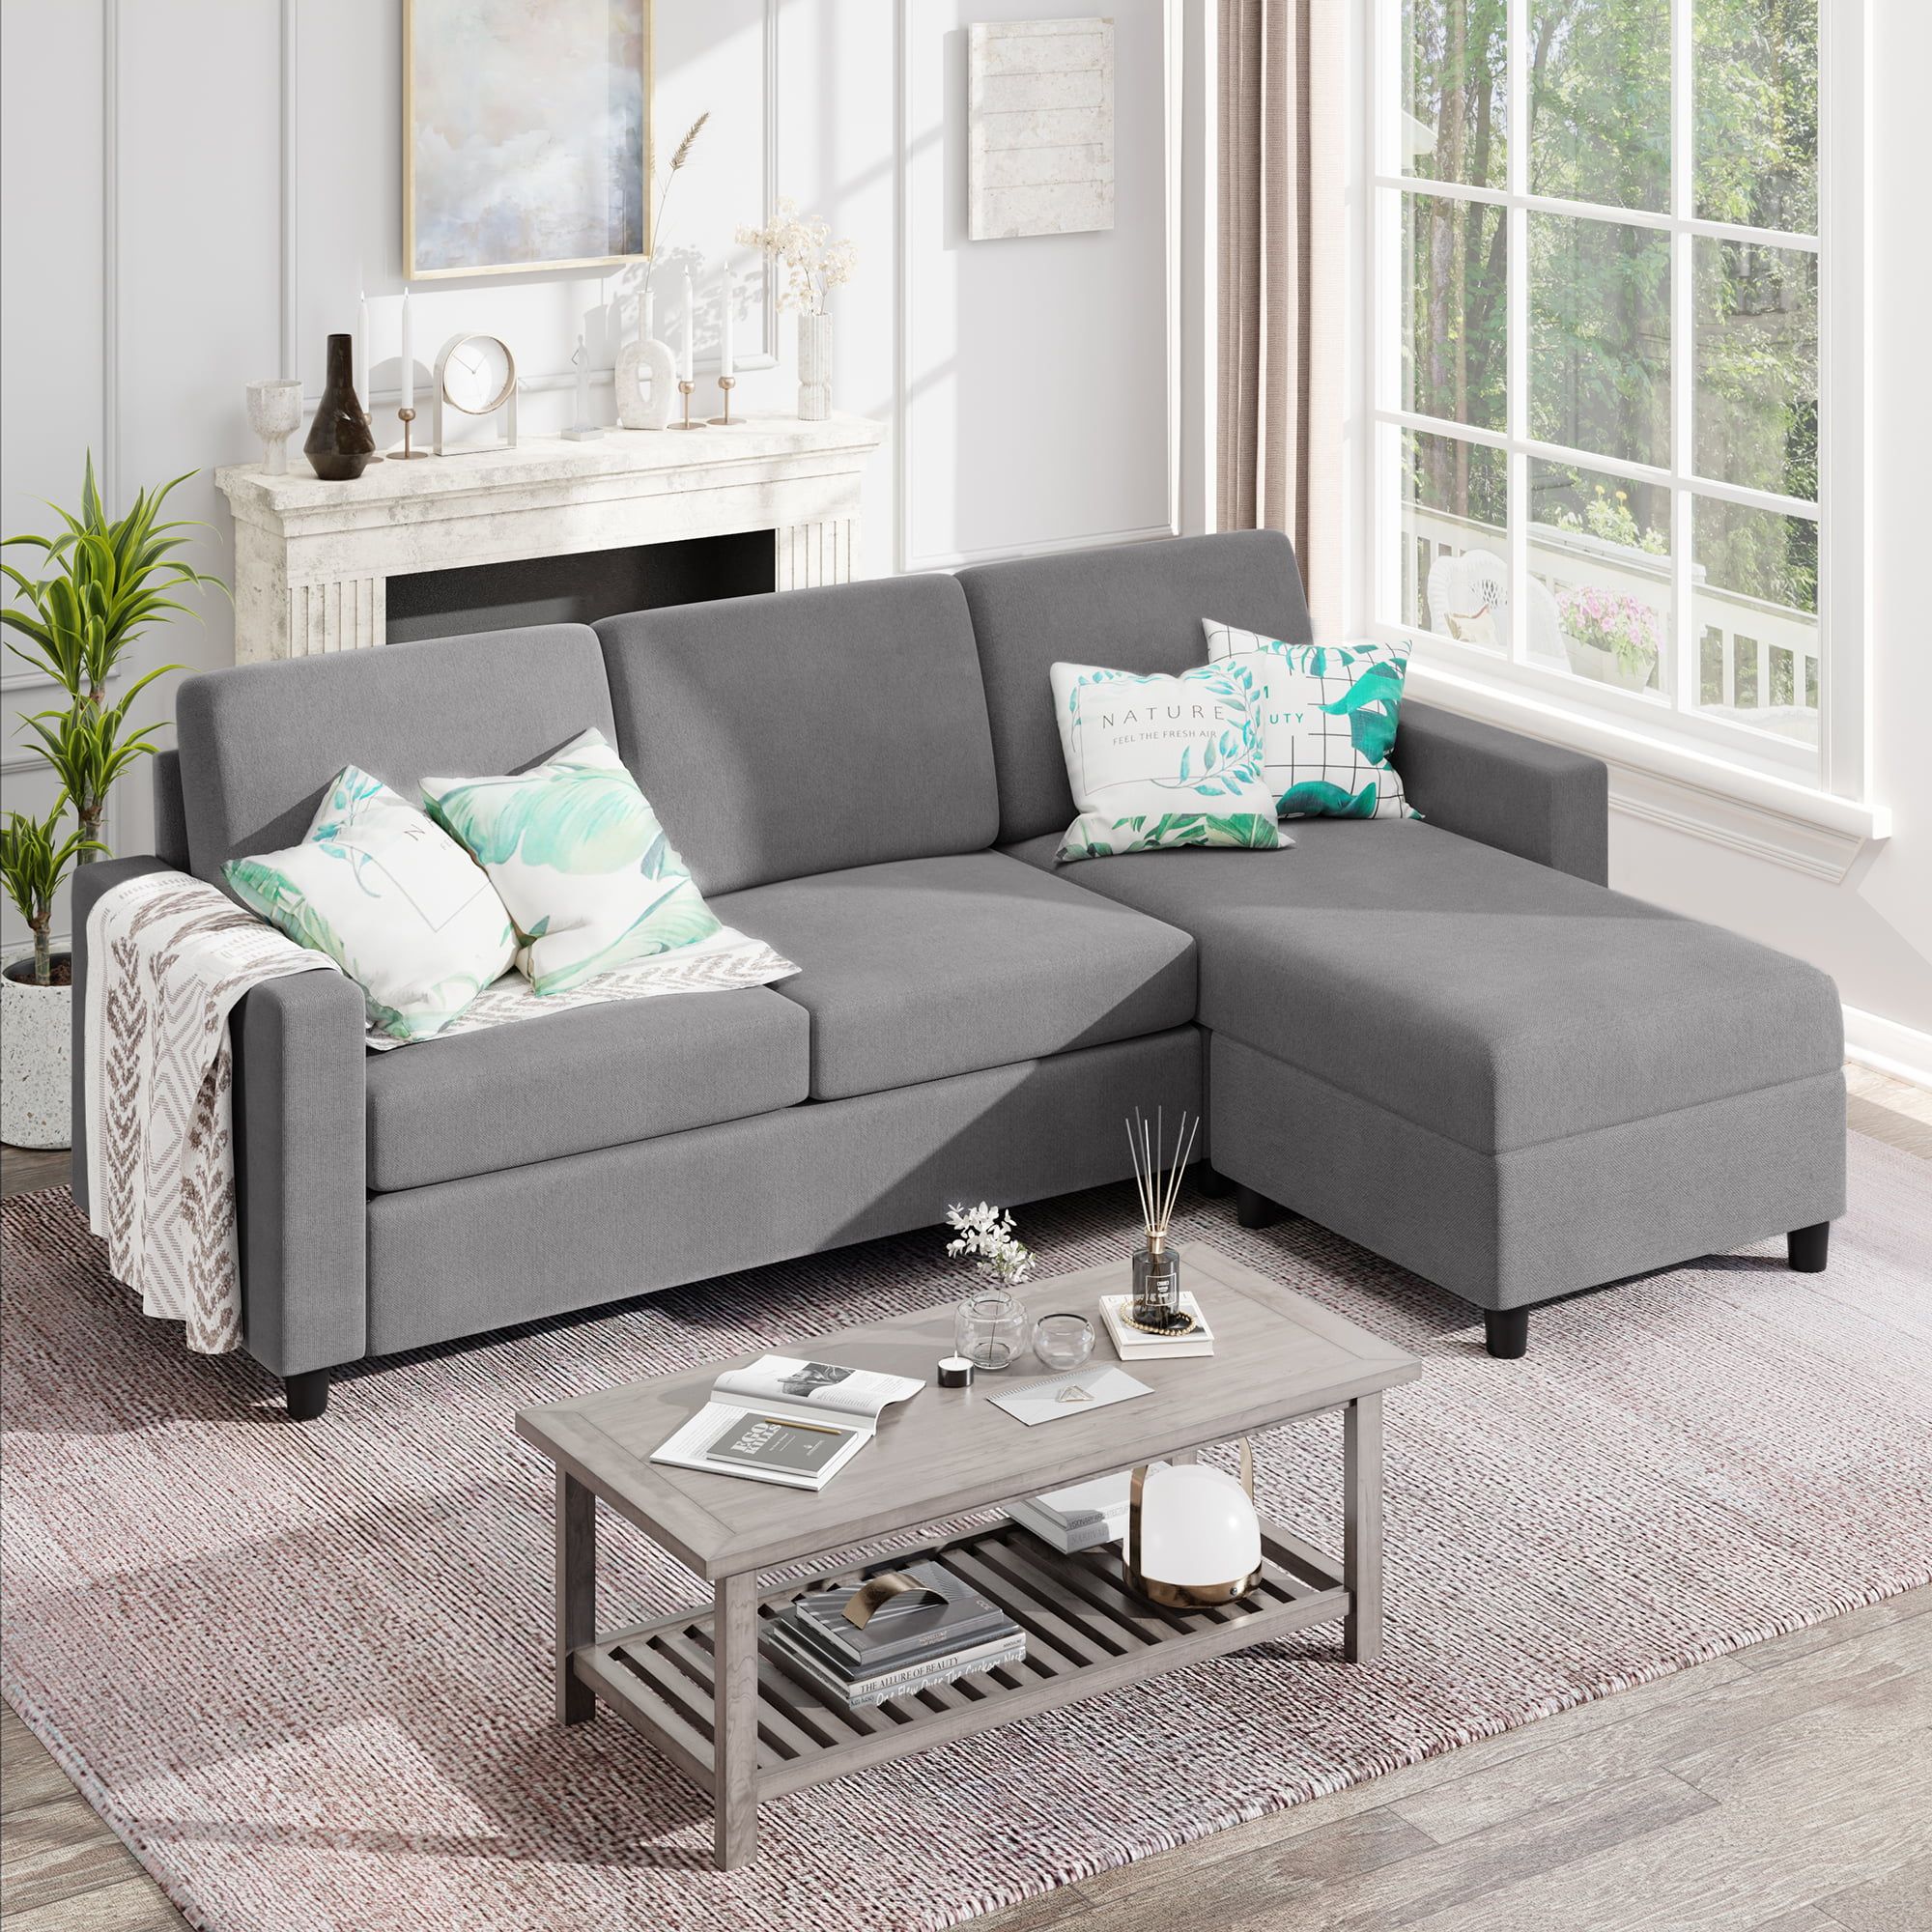 Sobaniilo Convertible Sectional Sofa Couch, Modern Linen Fabric L Shaped  3 Seat Sofa Sectional With Reversible Chaise For Small Space (dark Gray) –  Walmart With Reversible Sectional Sofas (View 10 of 20)